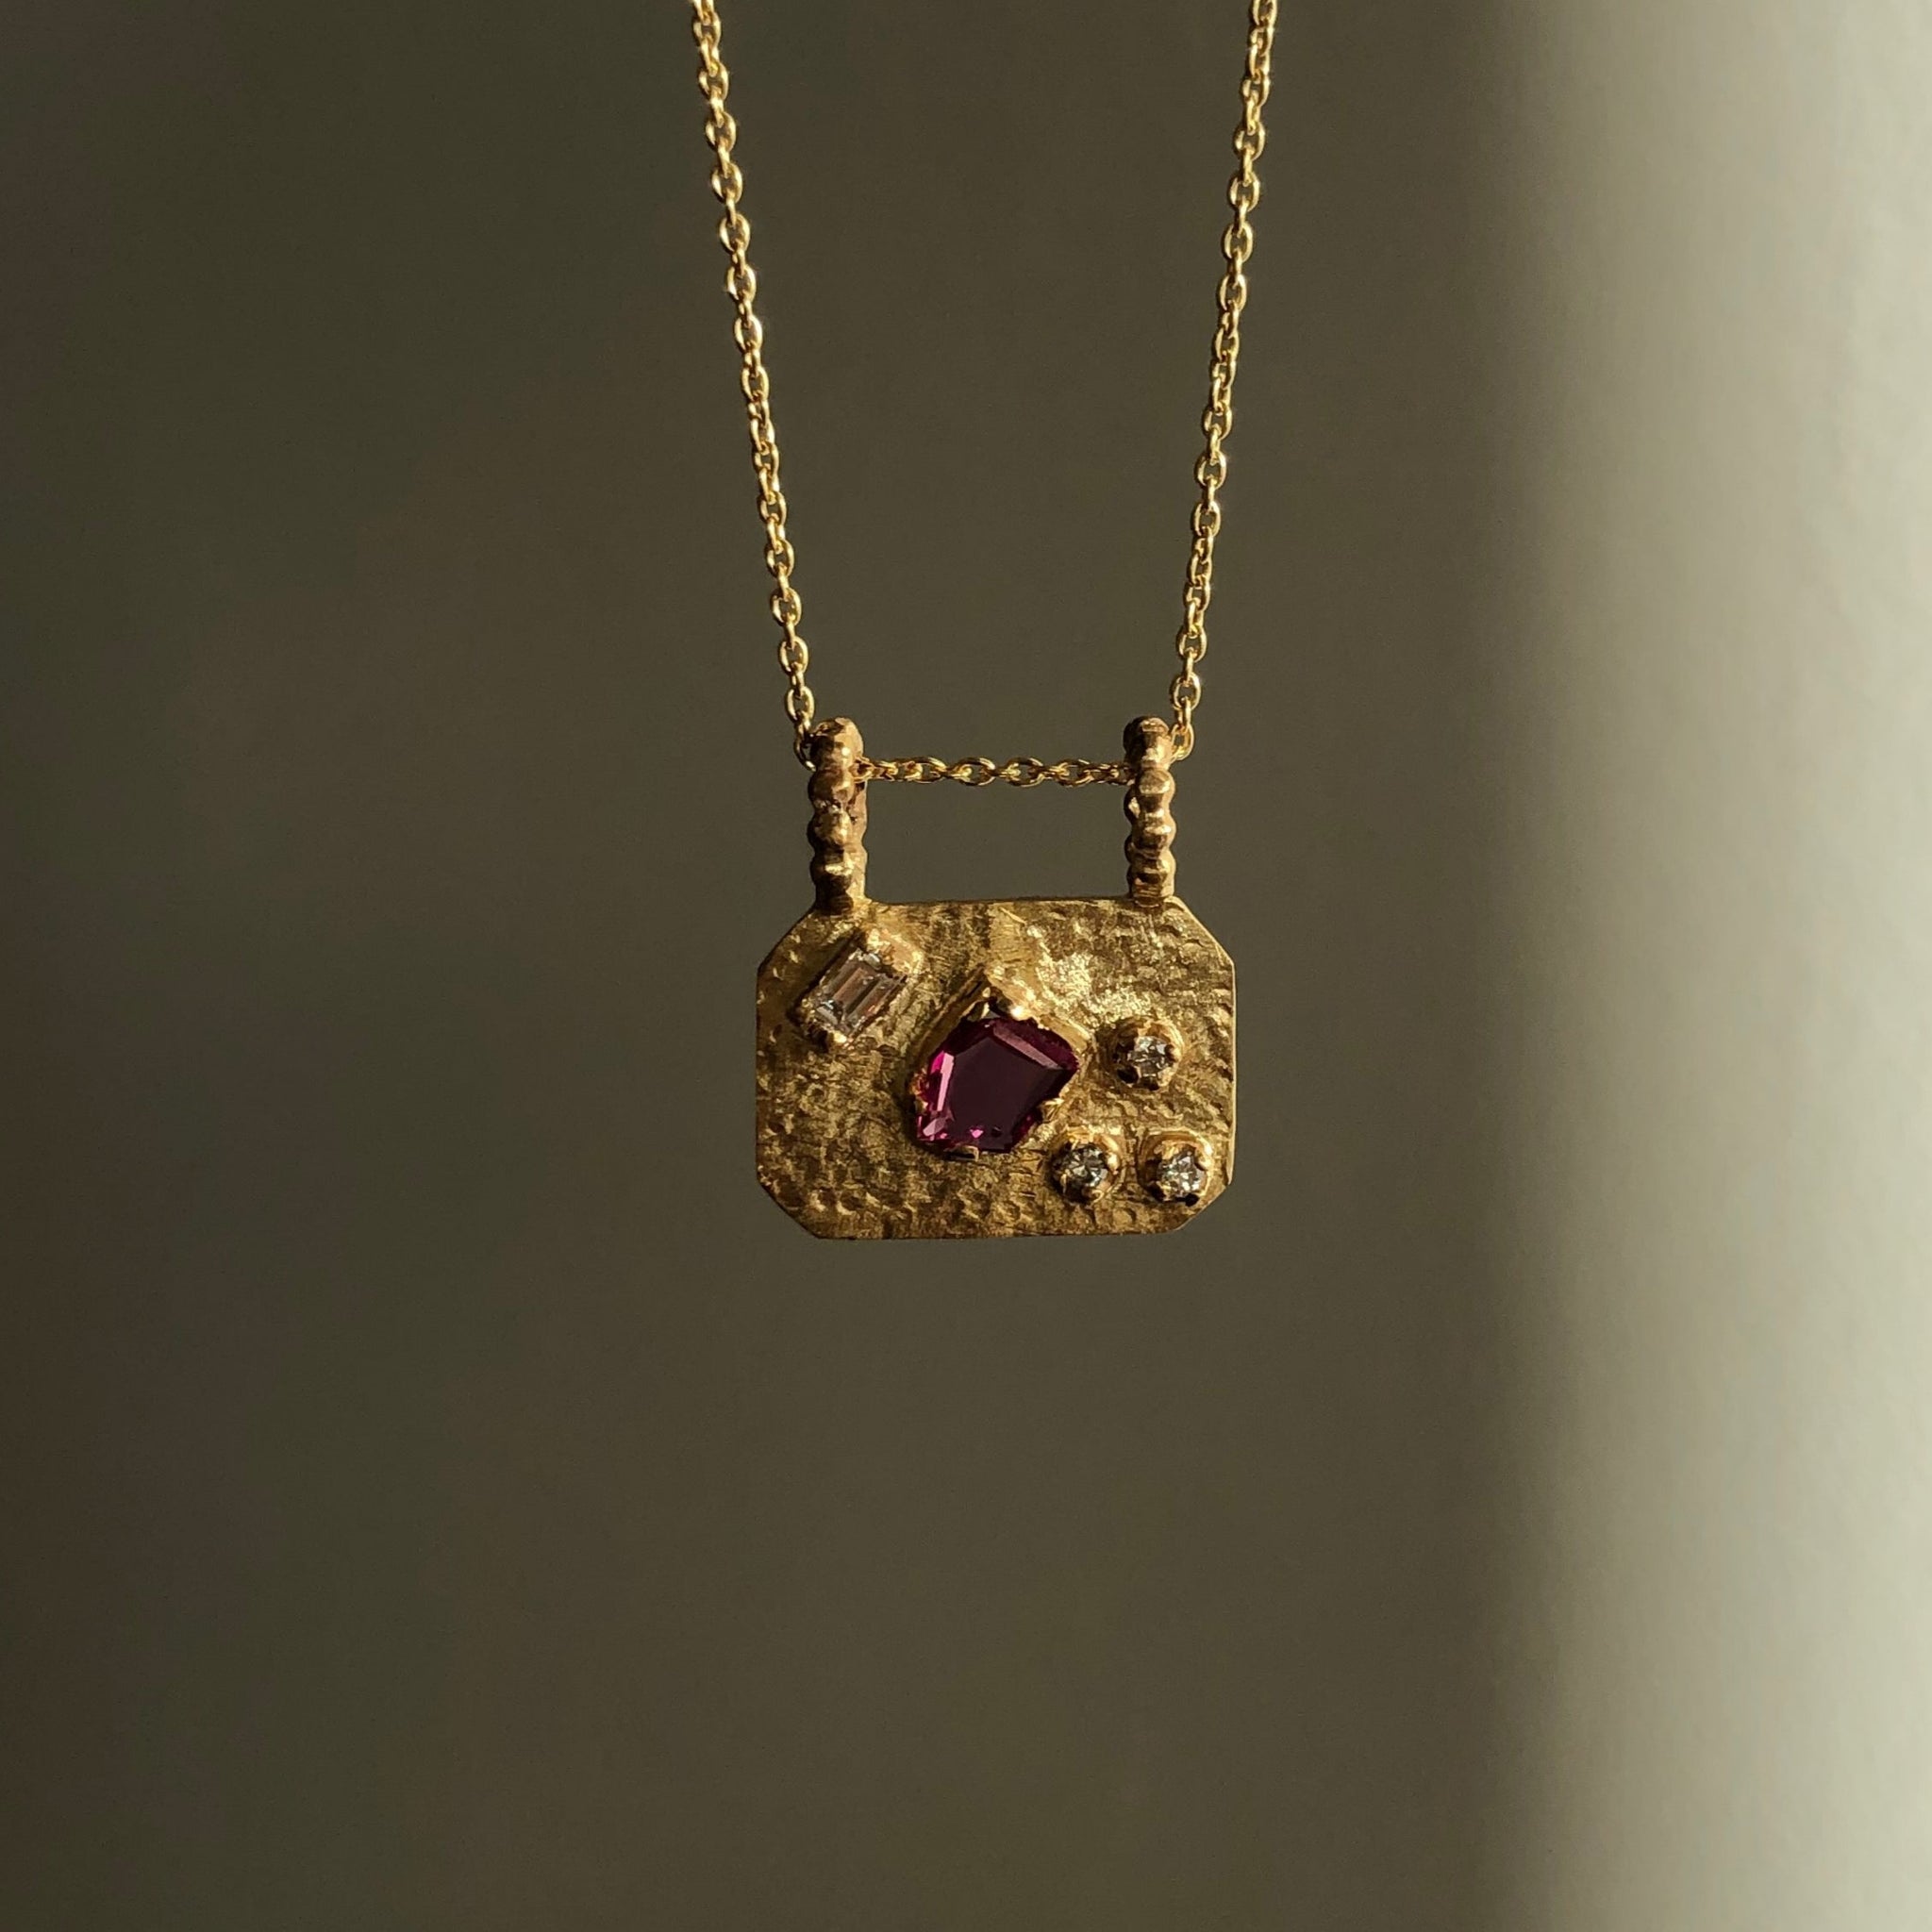 Medley Pendant No. 8 Necklace (Octagon), Solid Gold | ONE-OF-A-KIND